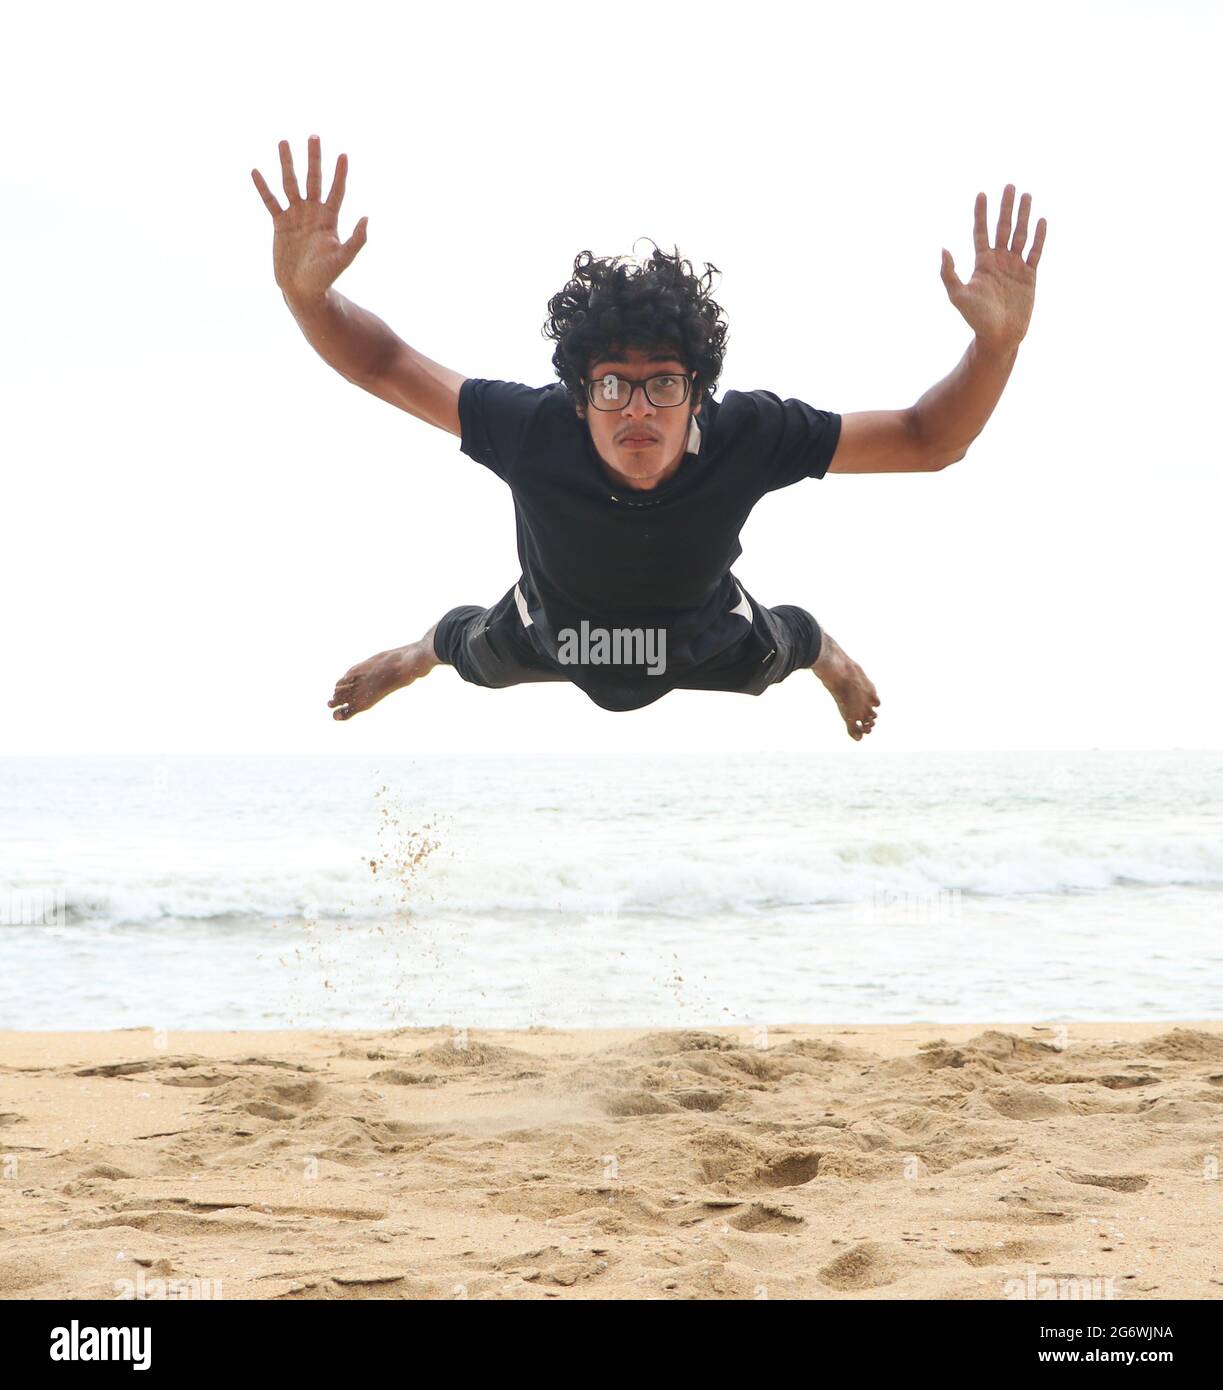 man jumping on the sandy beach after a taking push-up on a bright summer afternoon Stock Photo